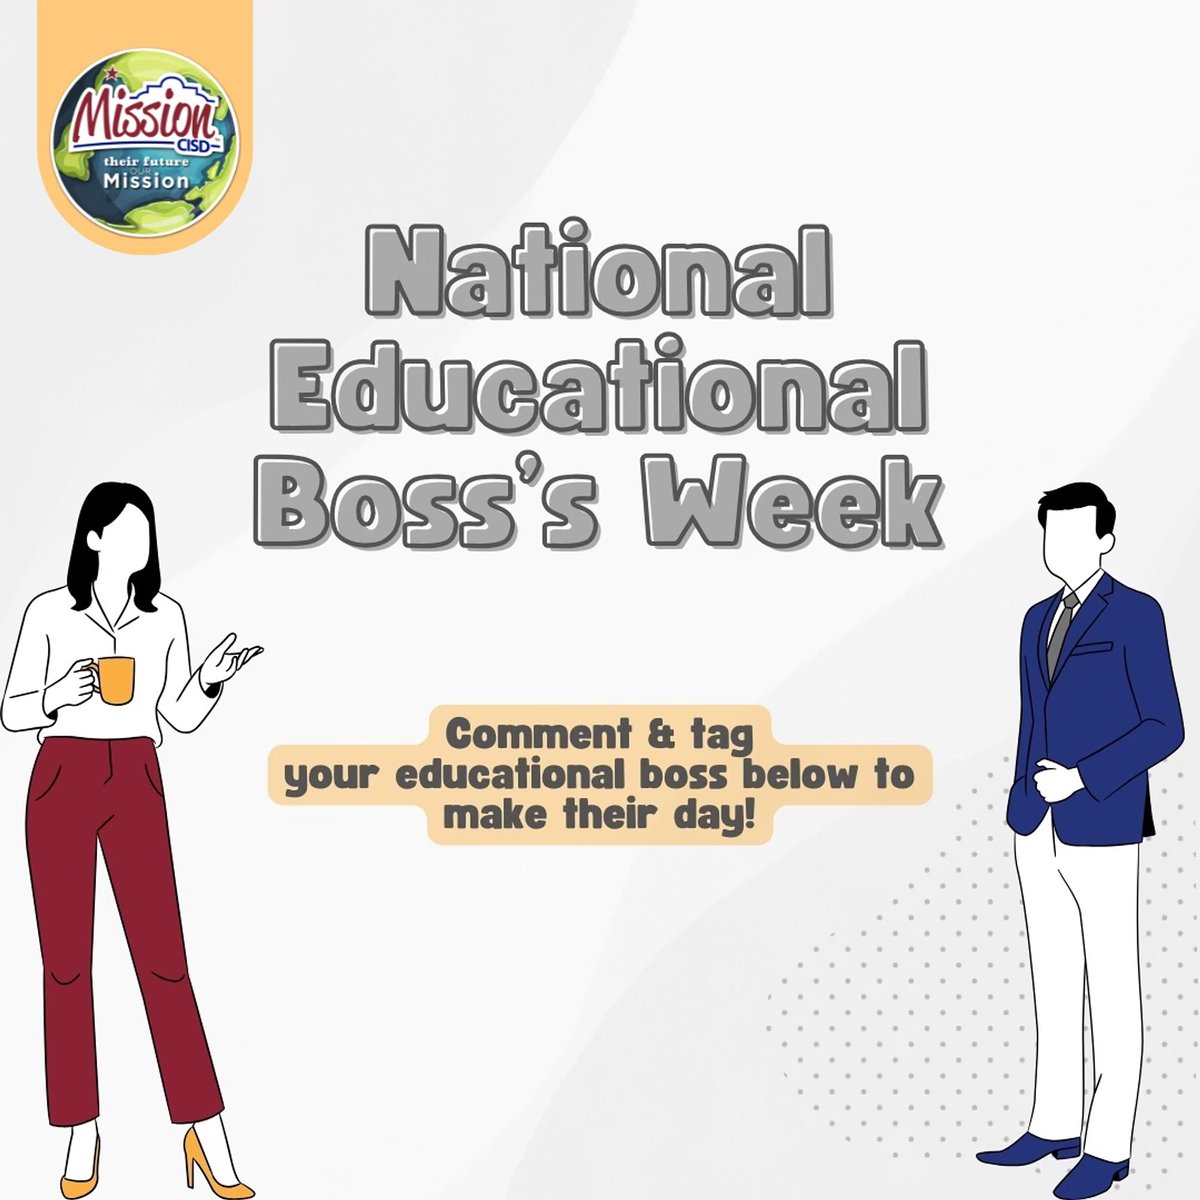 🎉 Happy Educational Boss's Week to all the incredible leaders at Mission CISD! This week, we celebrate the dedication, hard work, and inspiring leadership of our educational bosses. #EducationalBossesWeek